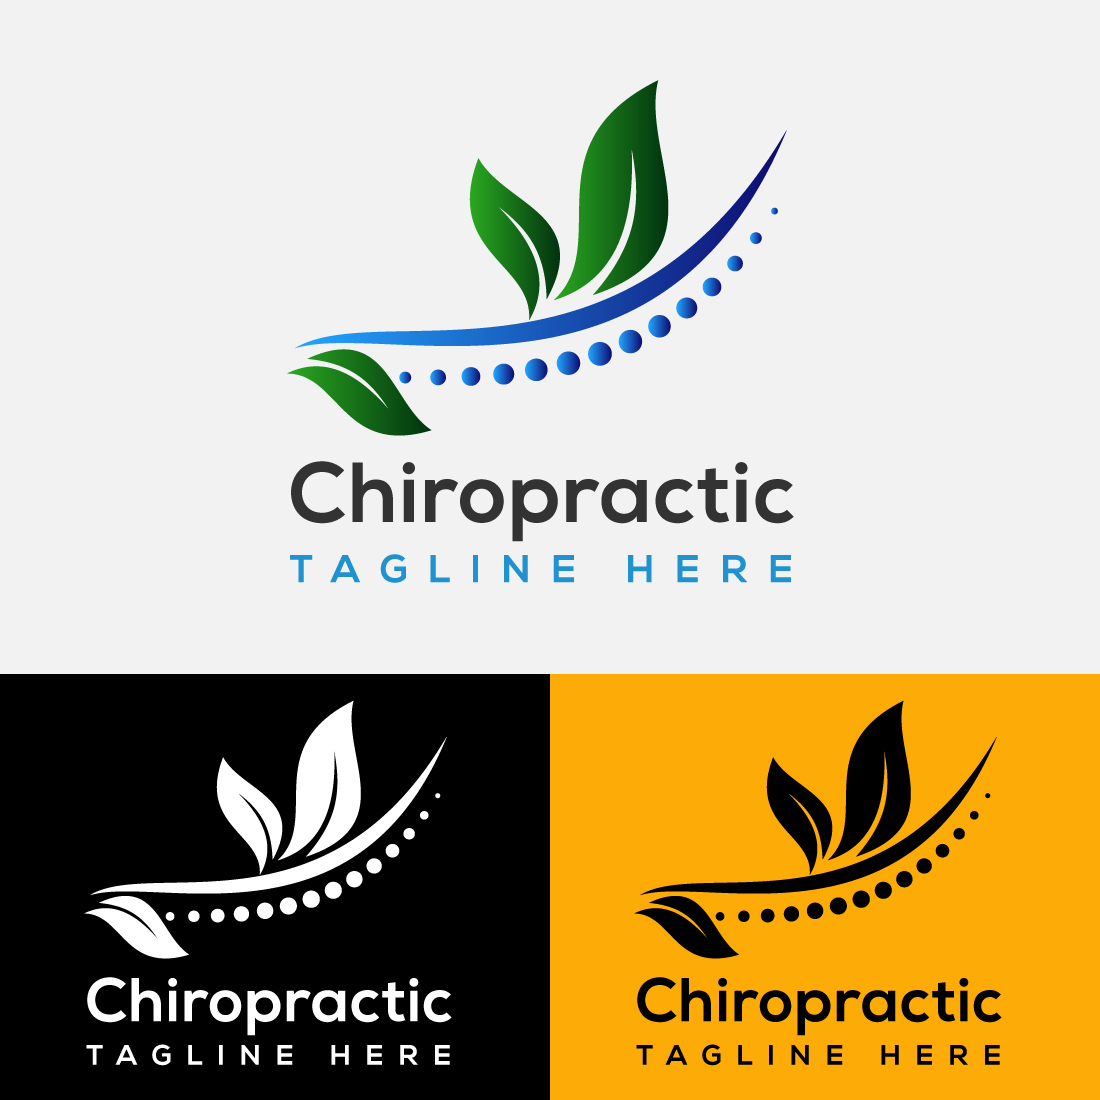 Chiropractic Logo Design Template cover image.